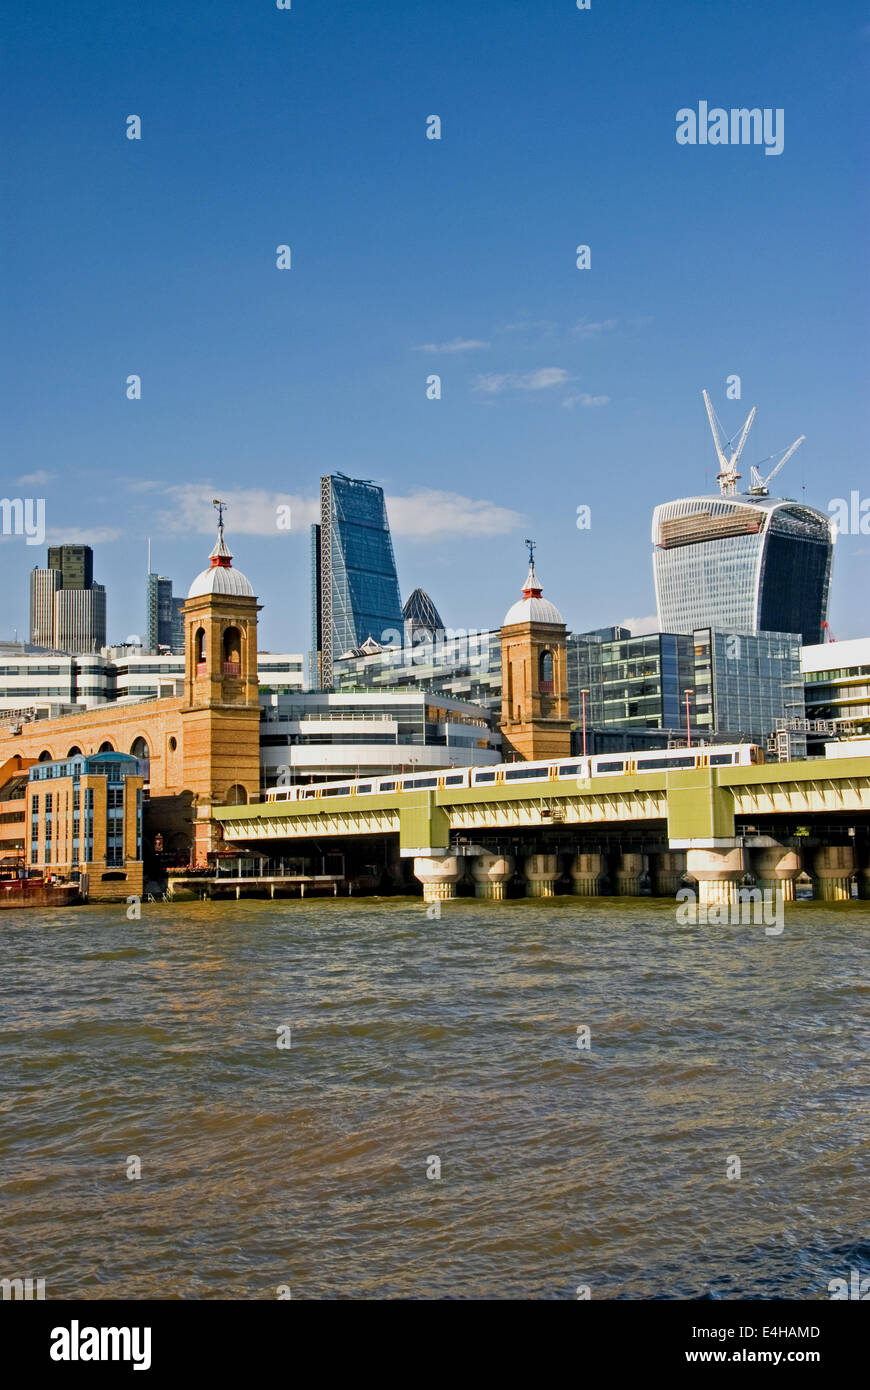 Cannon Street station stands on the north bank of the River Thames in the heart of the City of London. Stock Photo